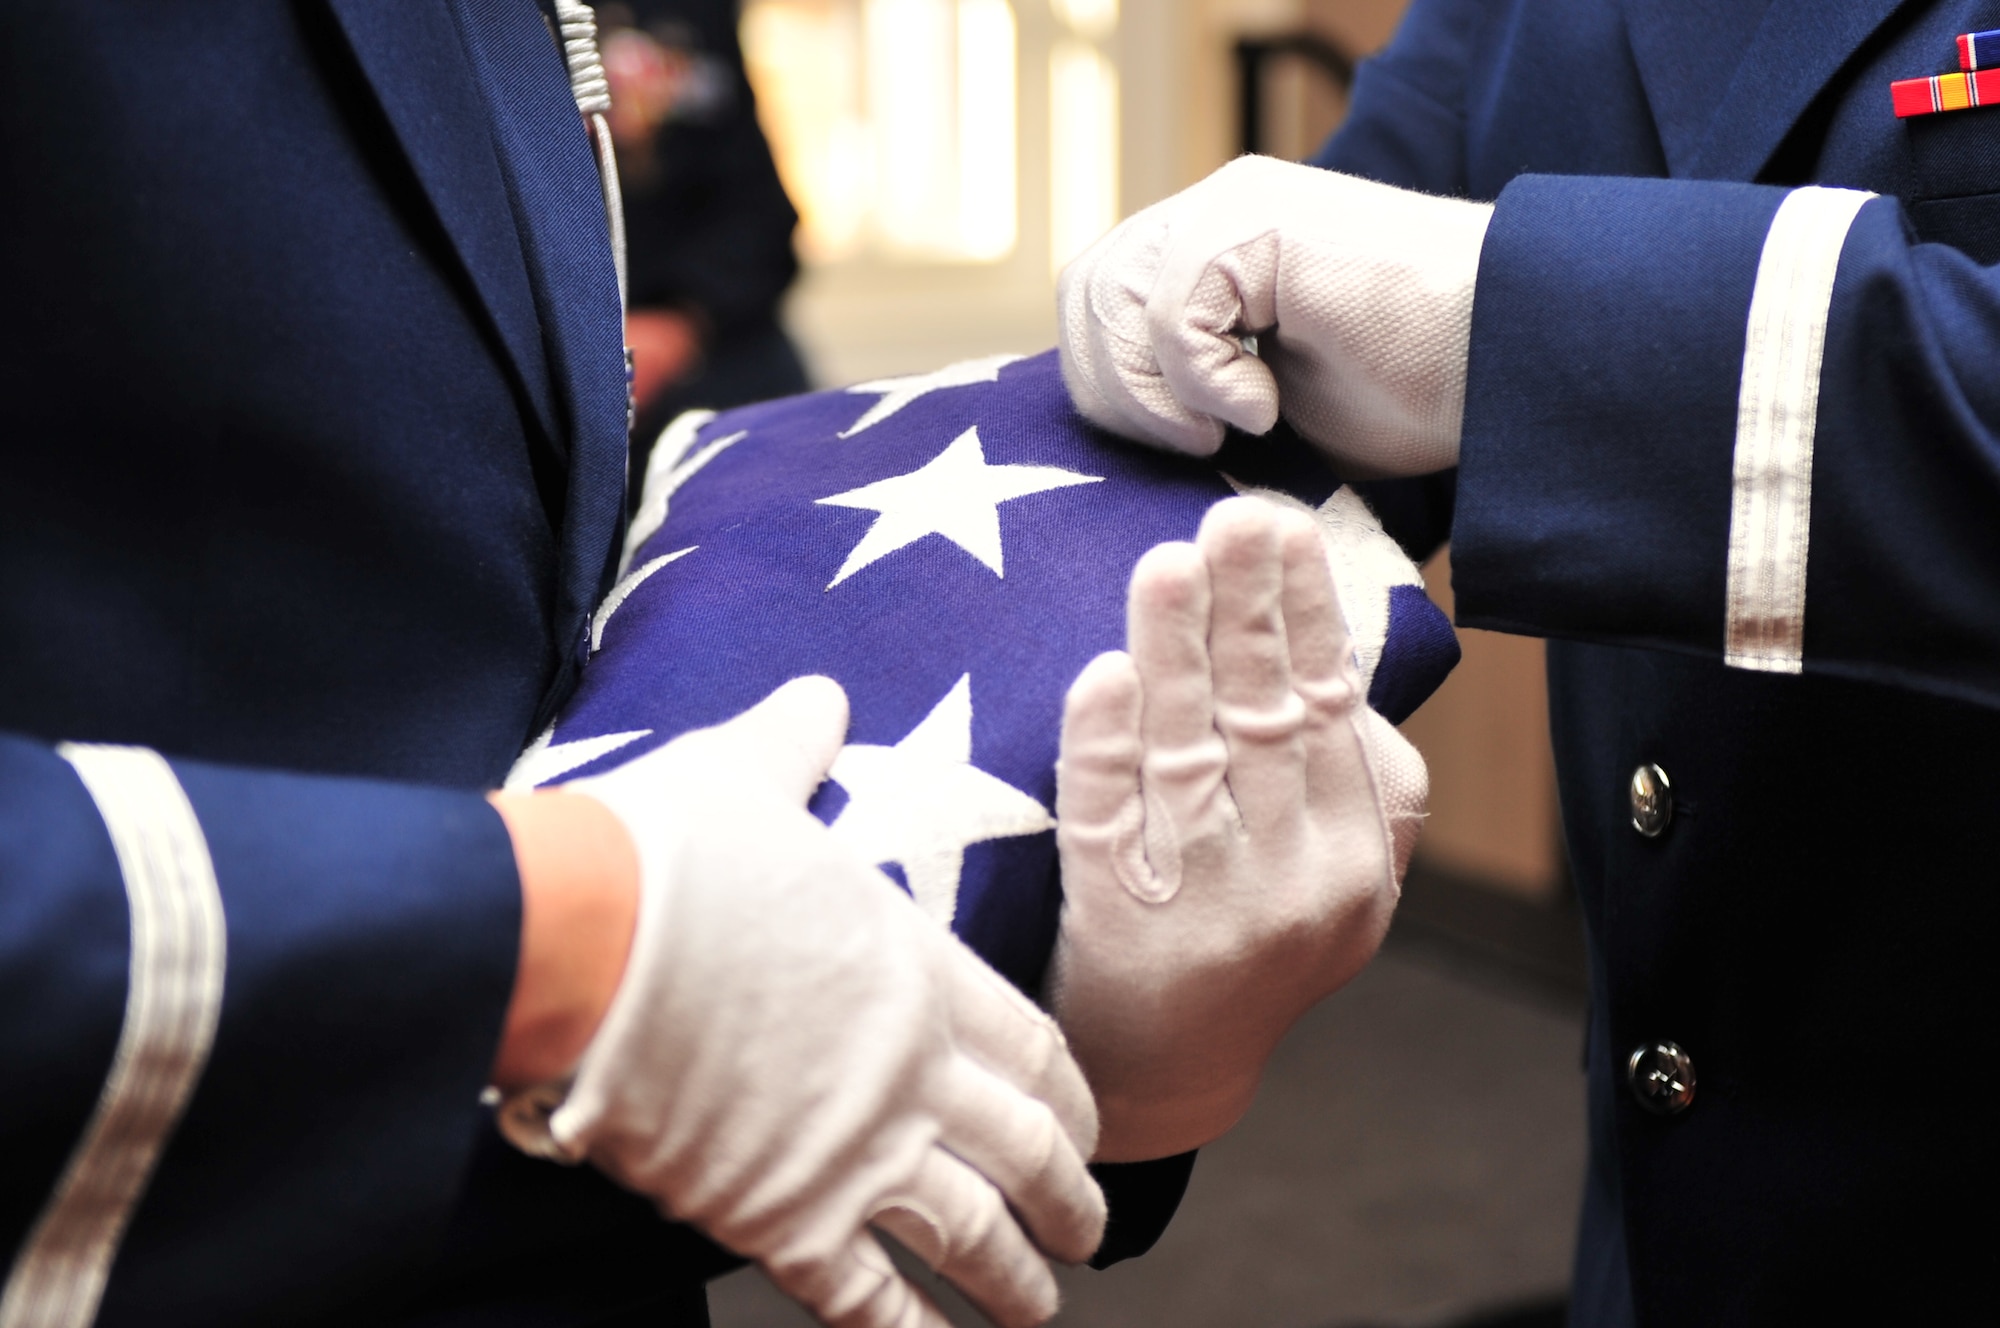 Airmen from the 4th Fighter Wing Honor Guard fold a flag for presentation during a retirement ceremony for Special Agent James Huskey, formerly from the Air Force Office of Special Investigation, on Seymour Johnson Air Force Base, N.C., Feb. 26, 2010. The Seymour Johnson Honor Guard has 44 assigned Airmen including a full-time trainer, ranging in rank from airman basic to technical sergeant from a variety of Air Force specialties. (U.S. Air Force photo/Senior Airman Rae Perry)